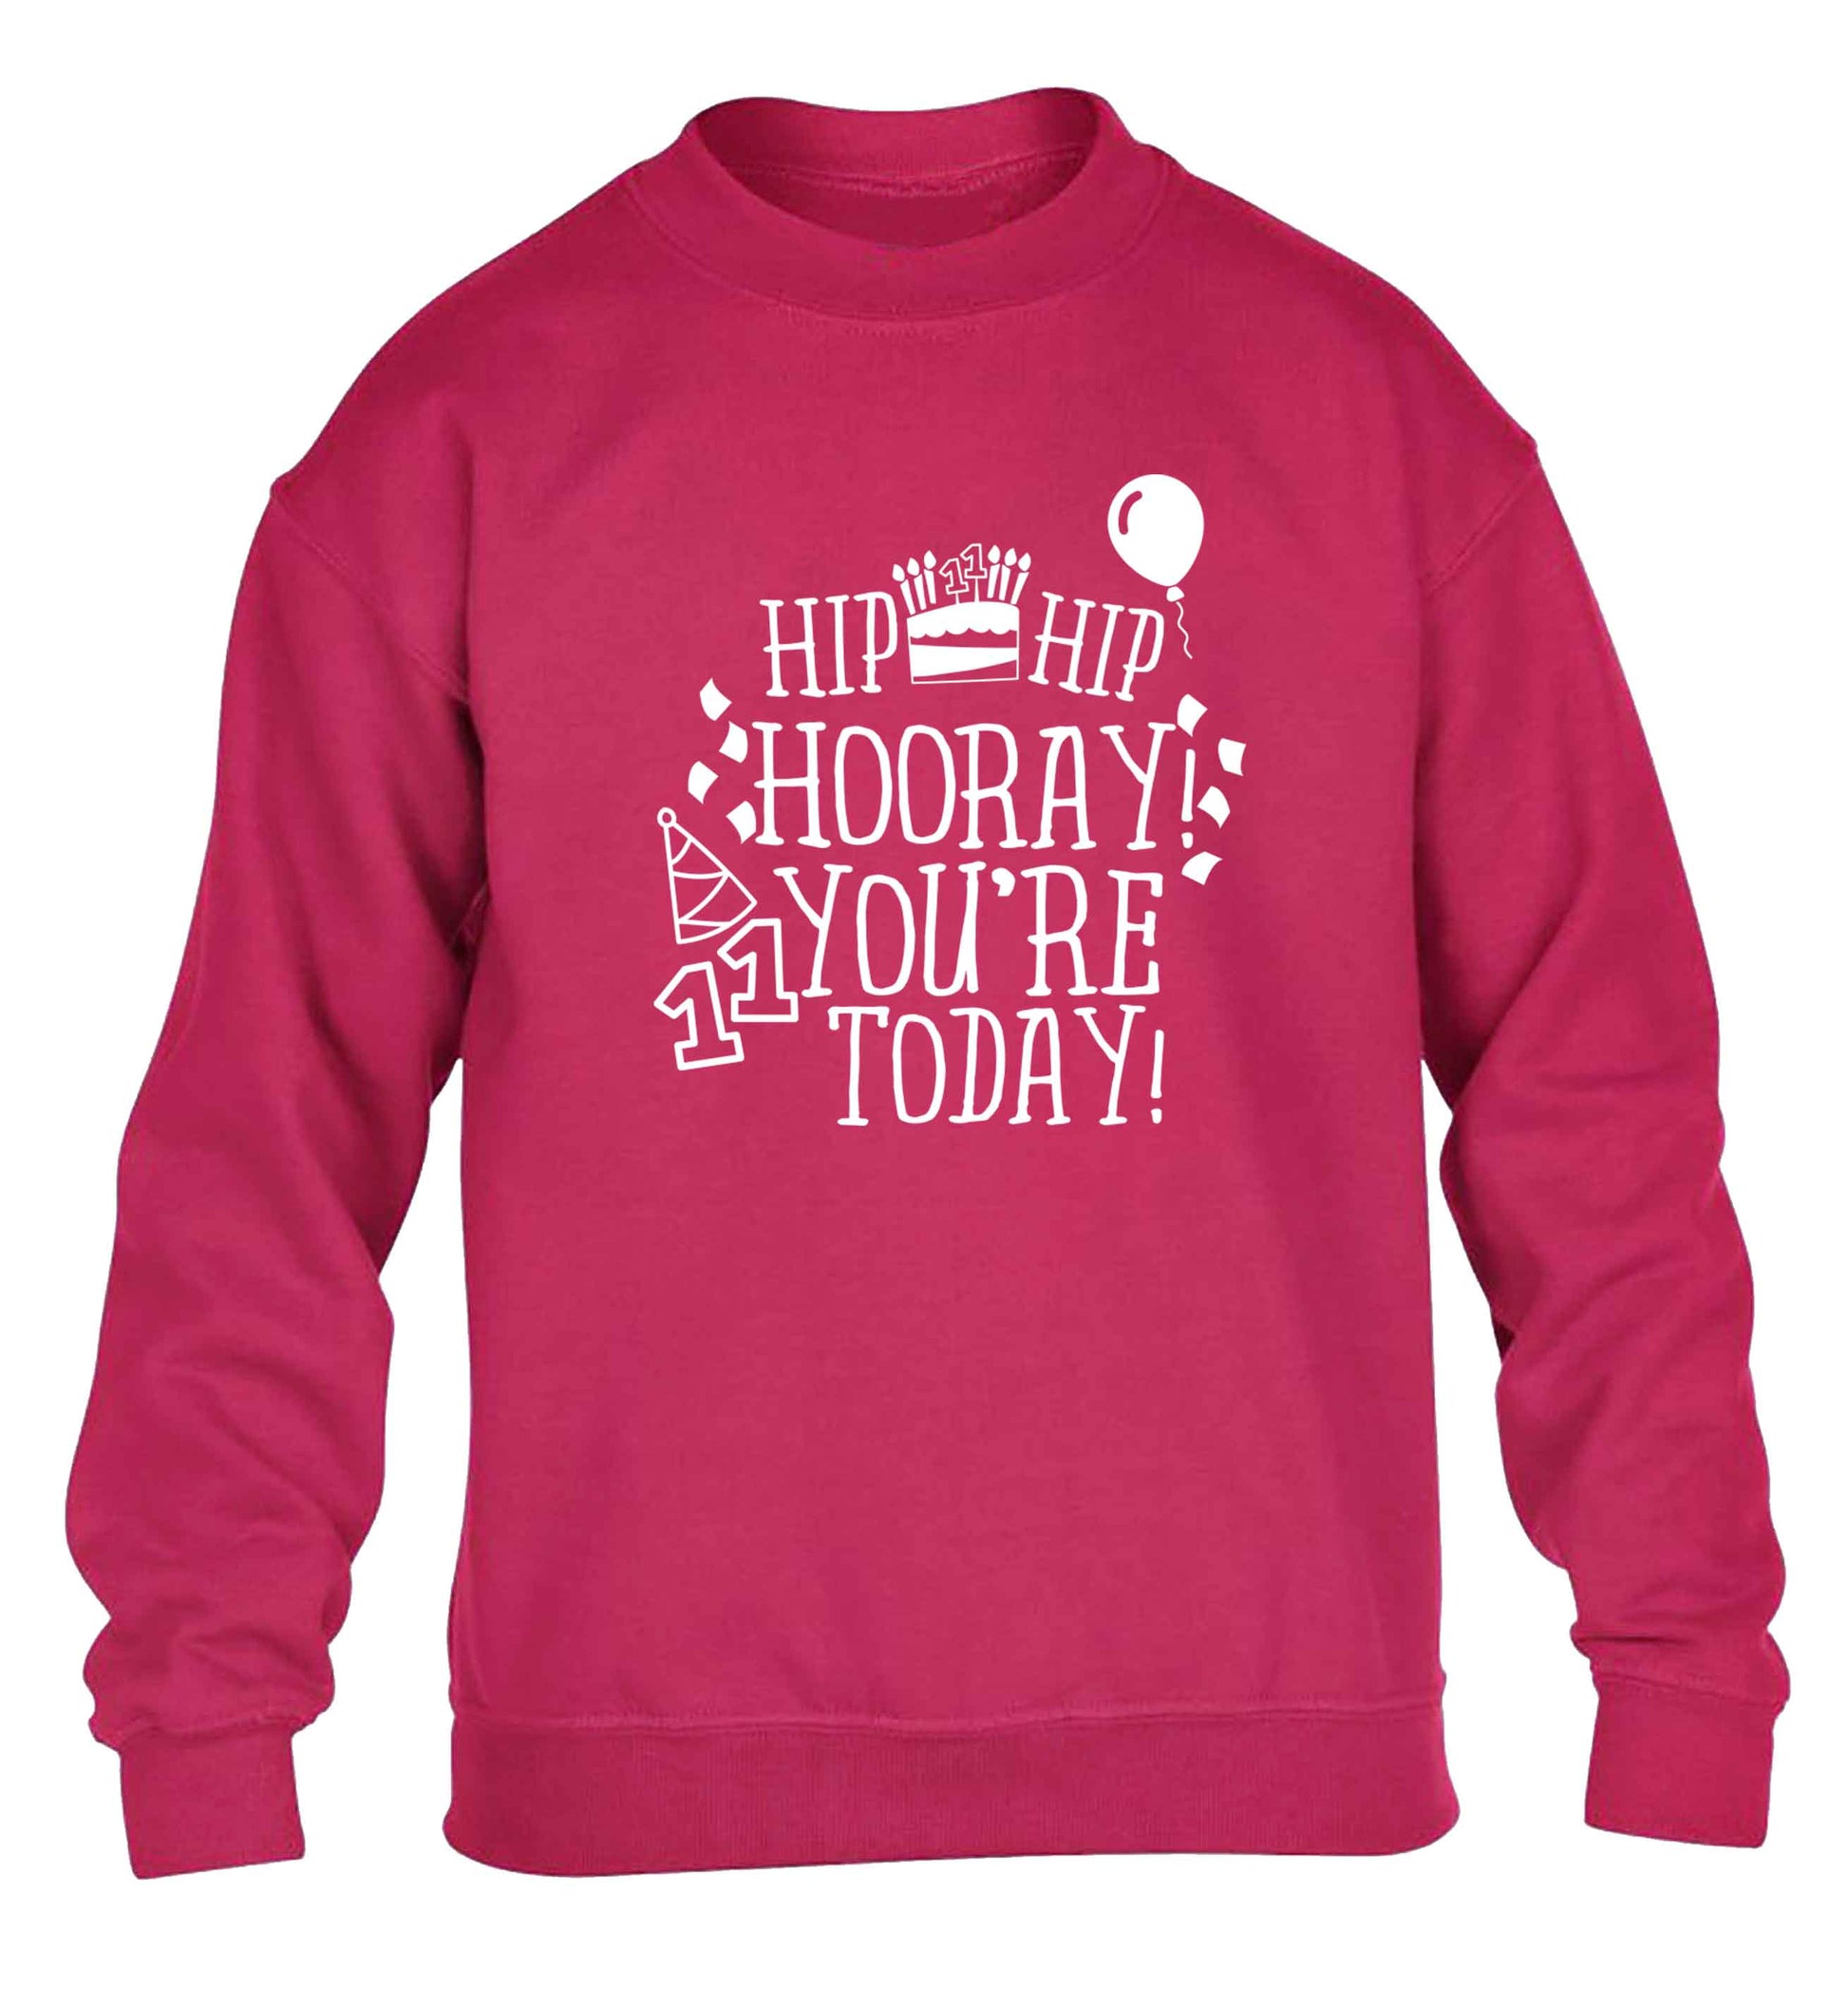 Hip hip hooray I you're eleven today! children's pink sweater 12-13 Years